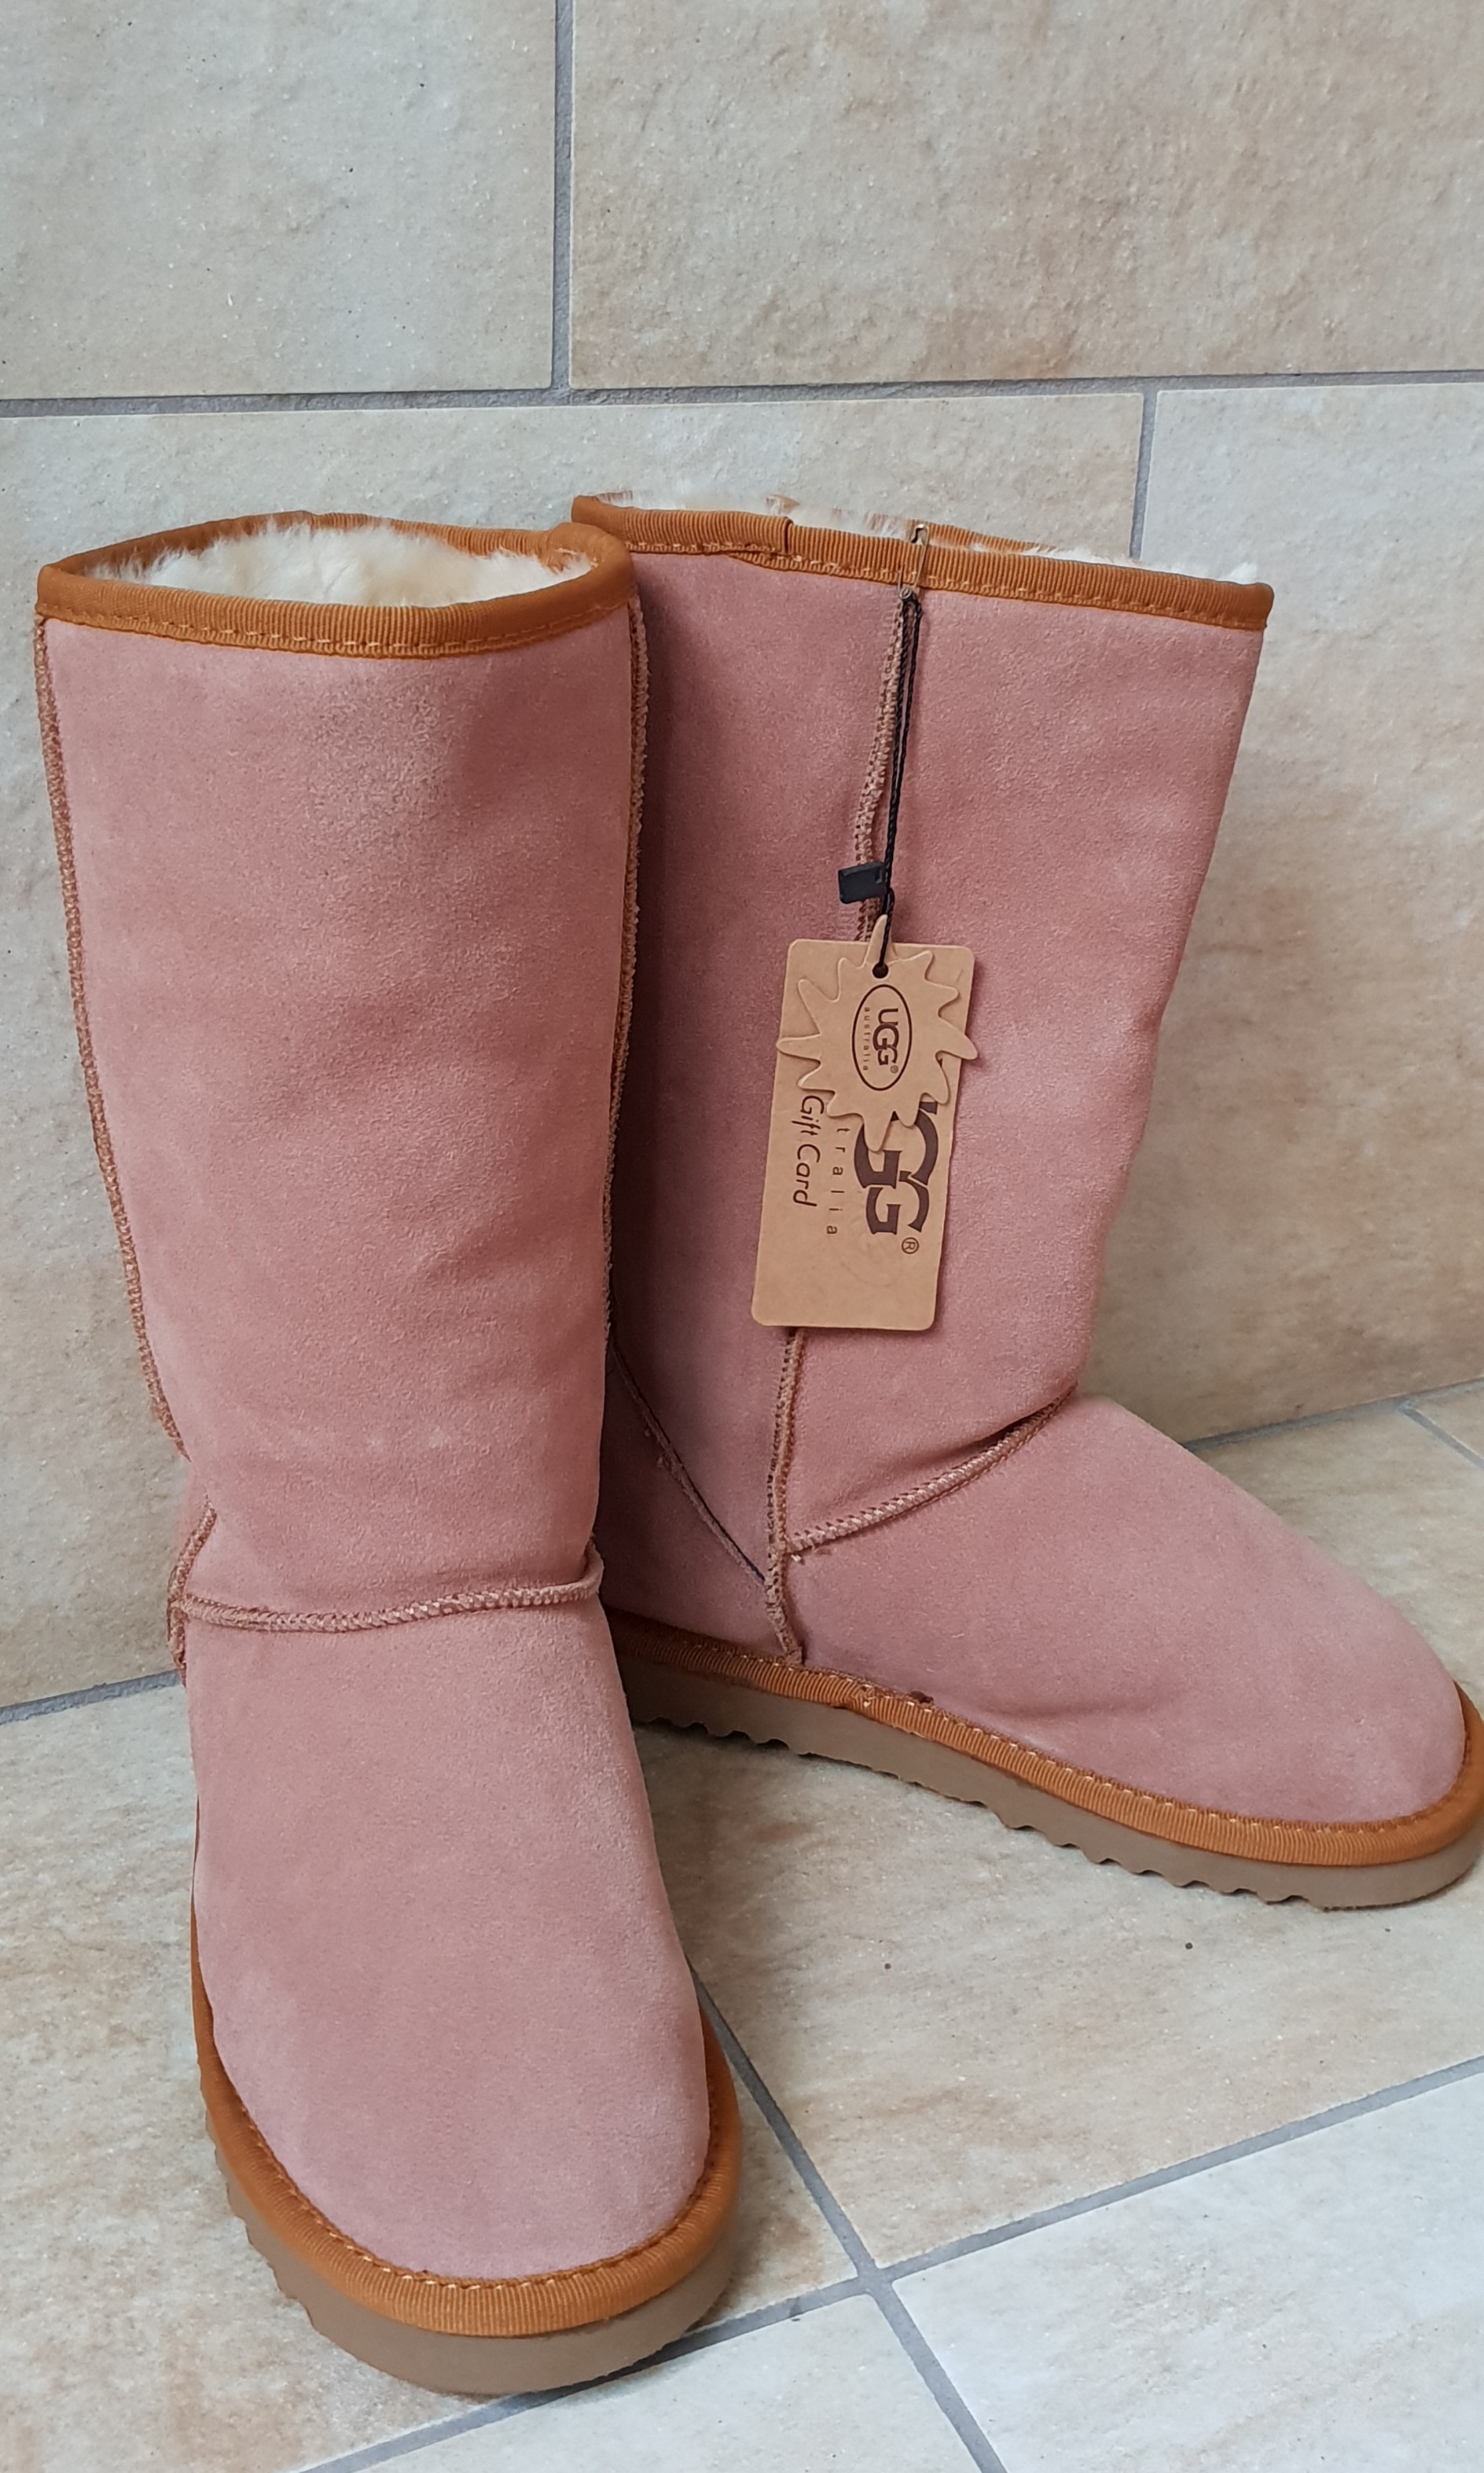 uggs boots on sale for kids